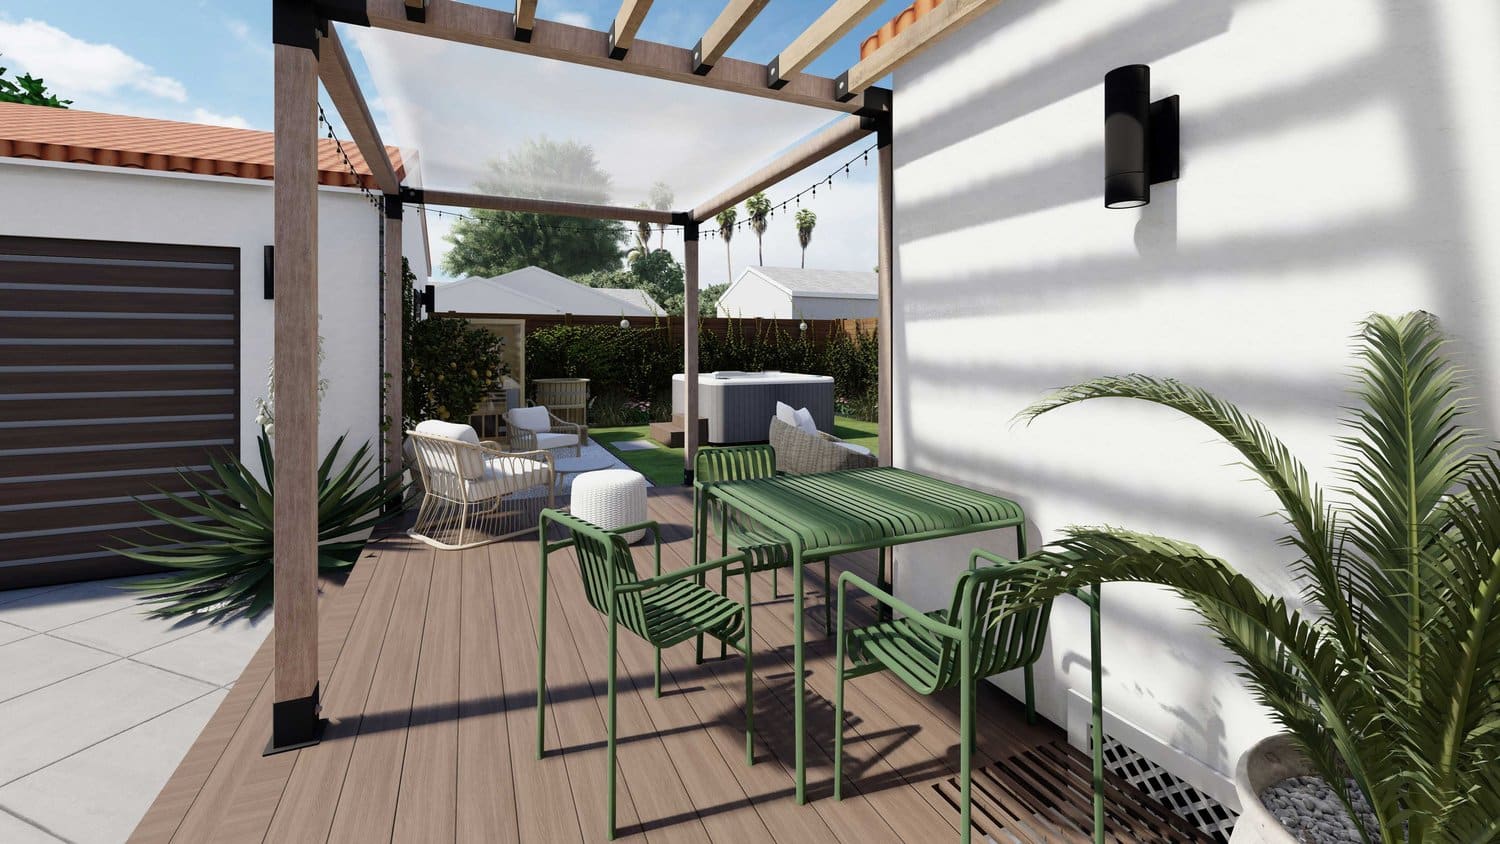 Los Angeles long side yard with deck and pergola seating area